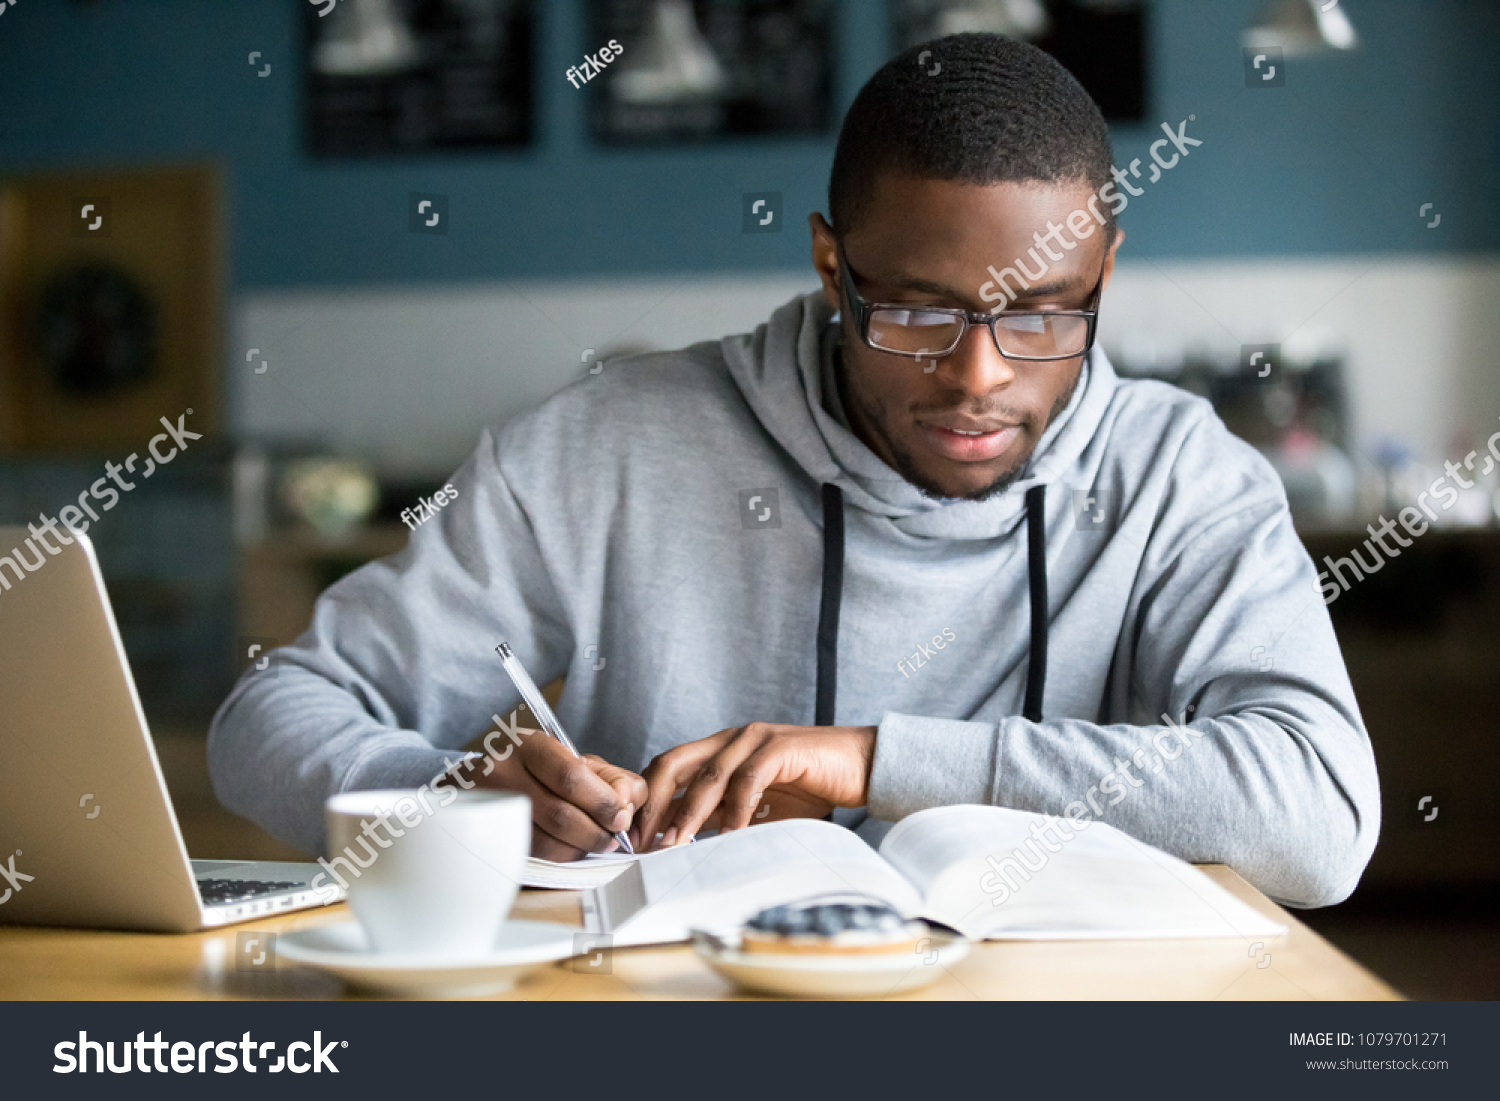 Focused millennial african american student in glasses making notes writing down information from book in cafe preparing for test or exam, young serious black man studying or working in coffee house #1079701271